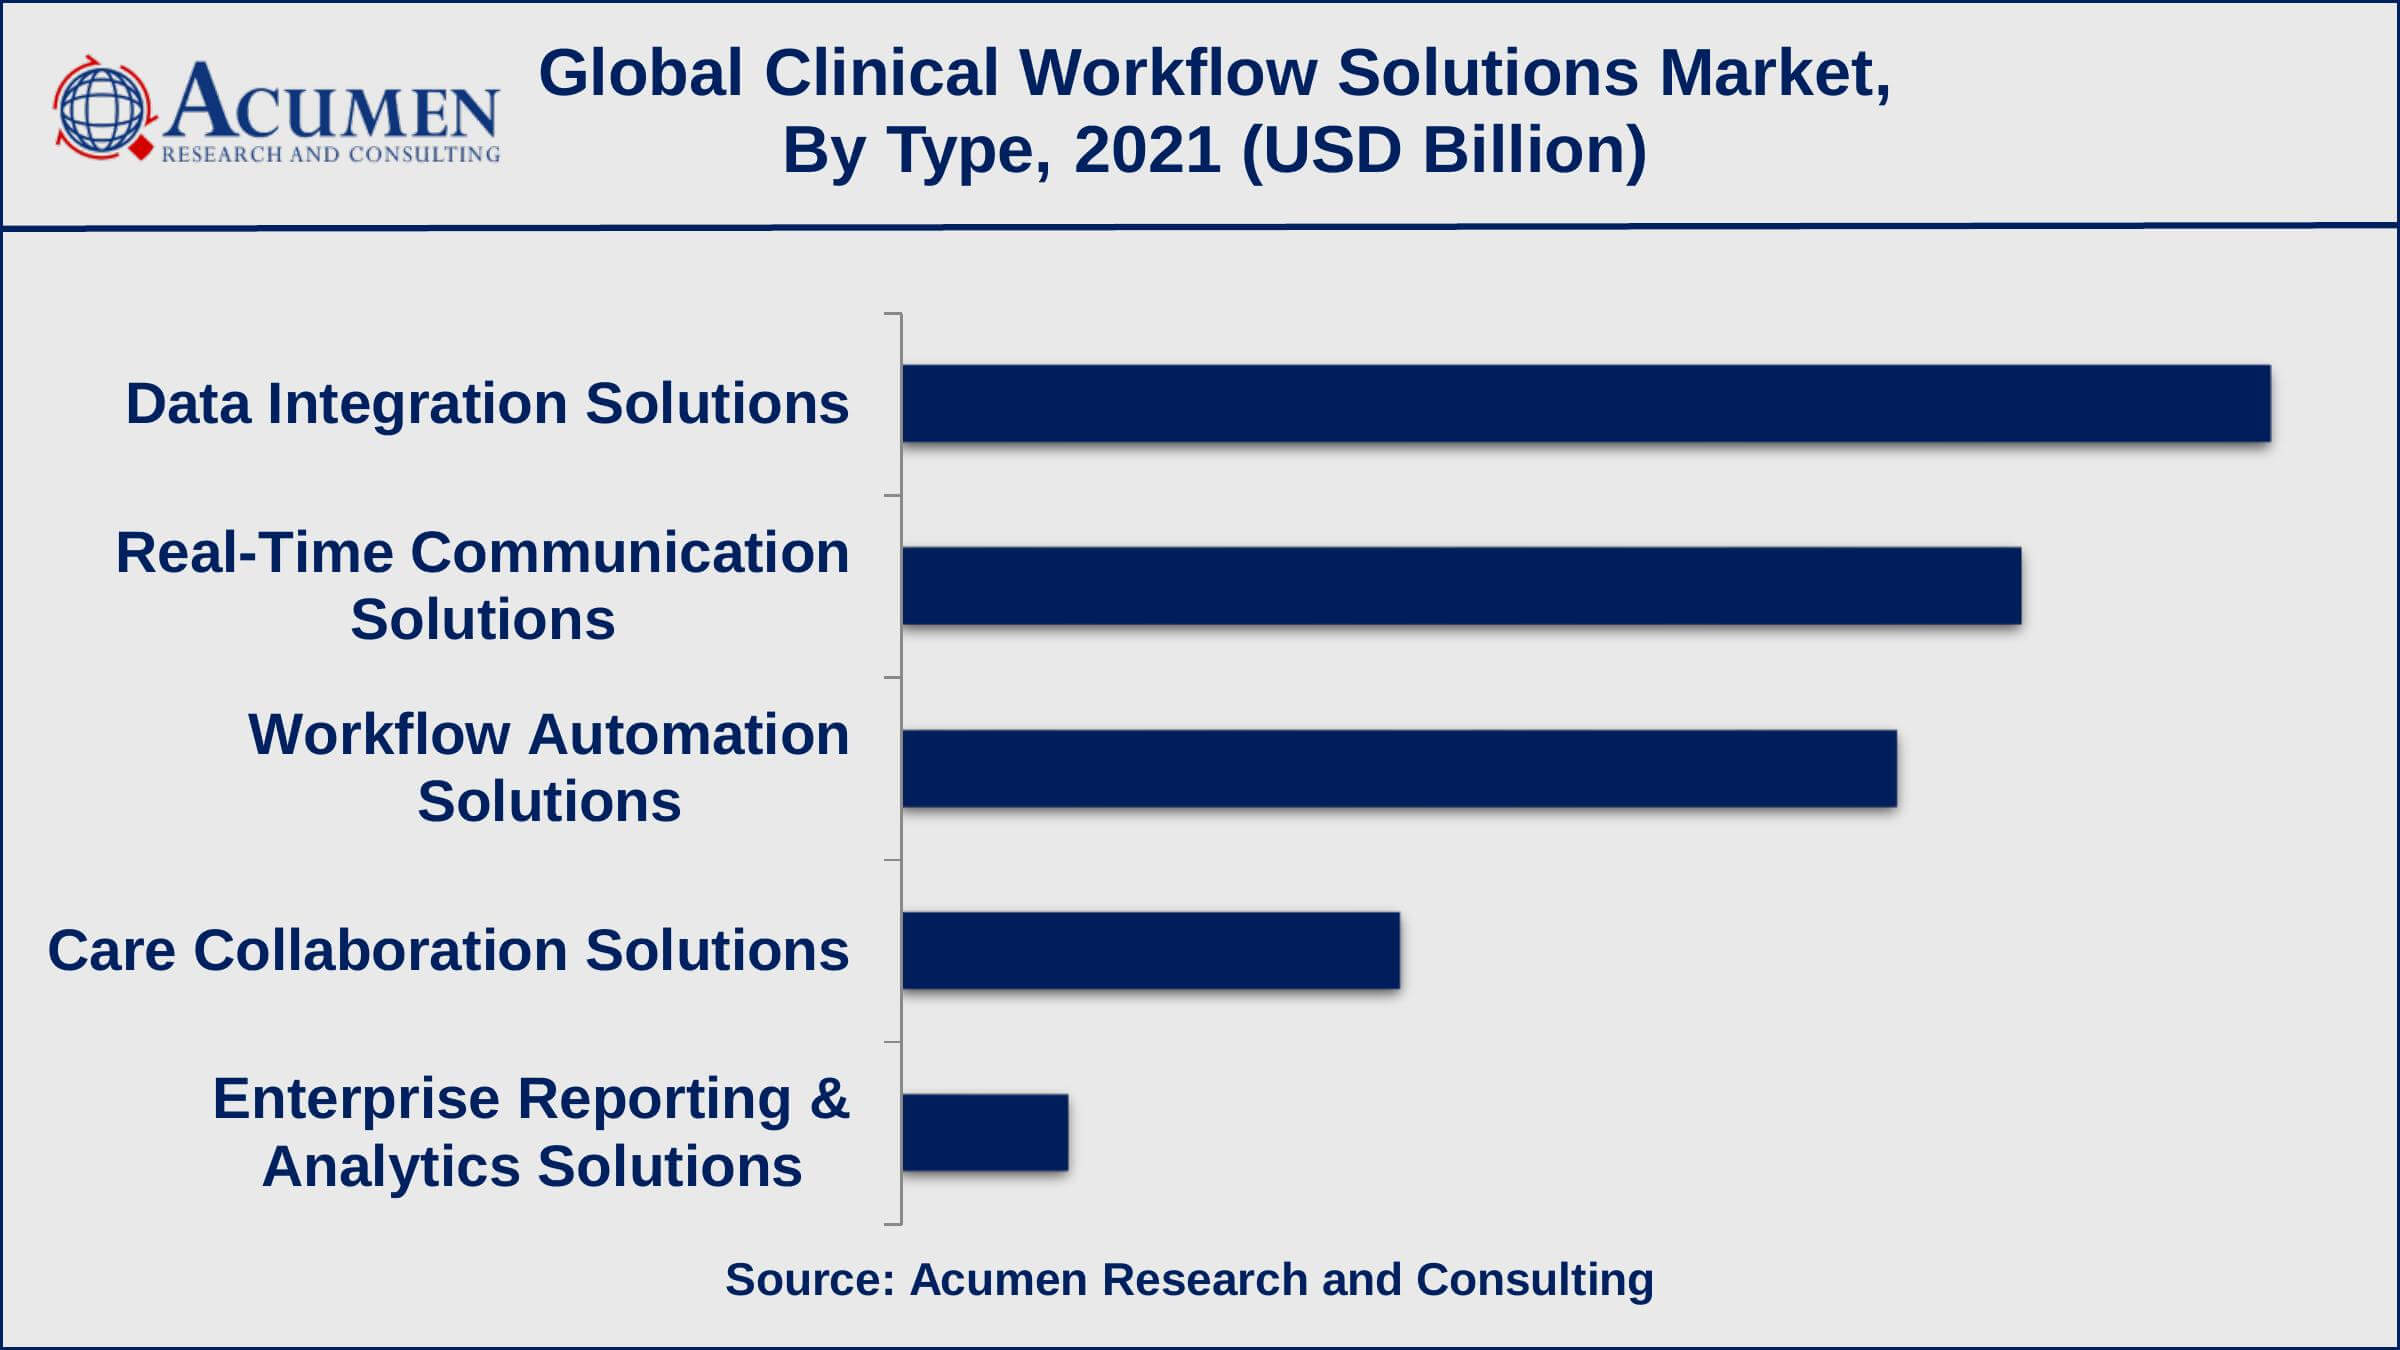 Clinical Workflow Solutions Market Report Statistics